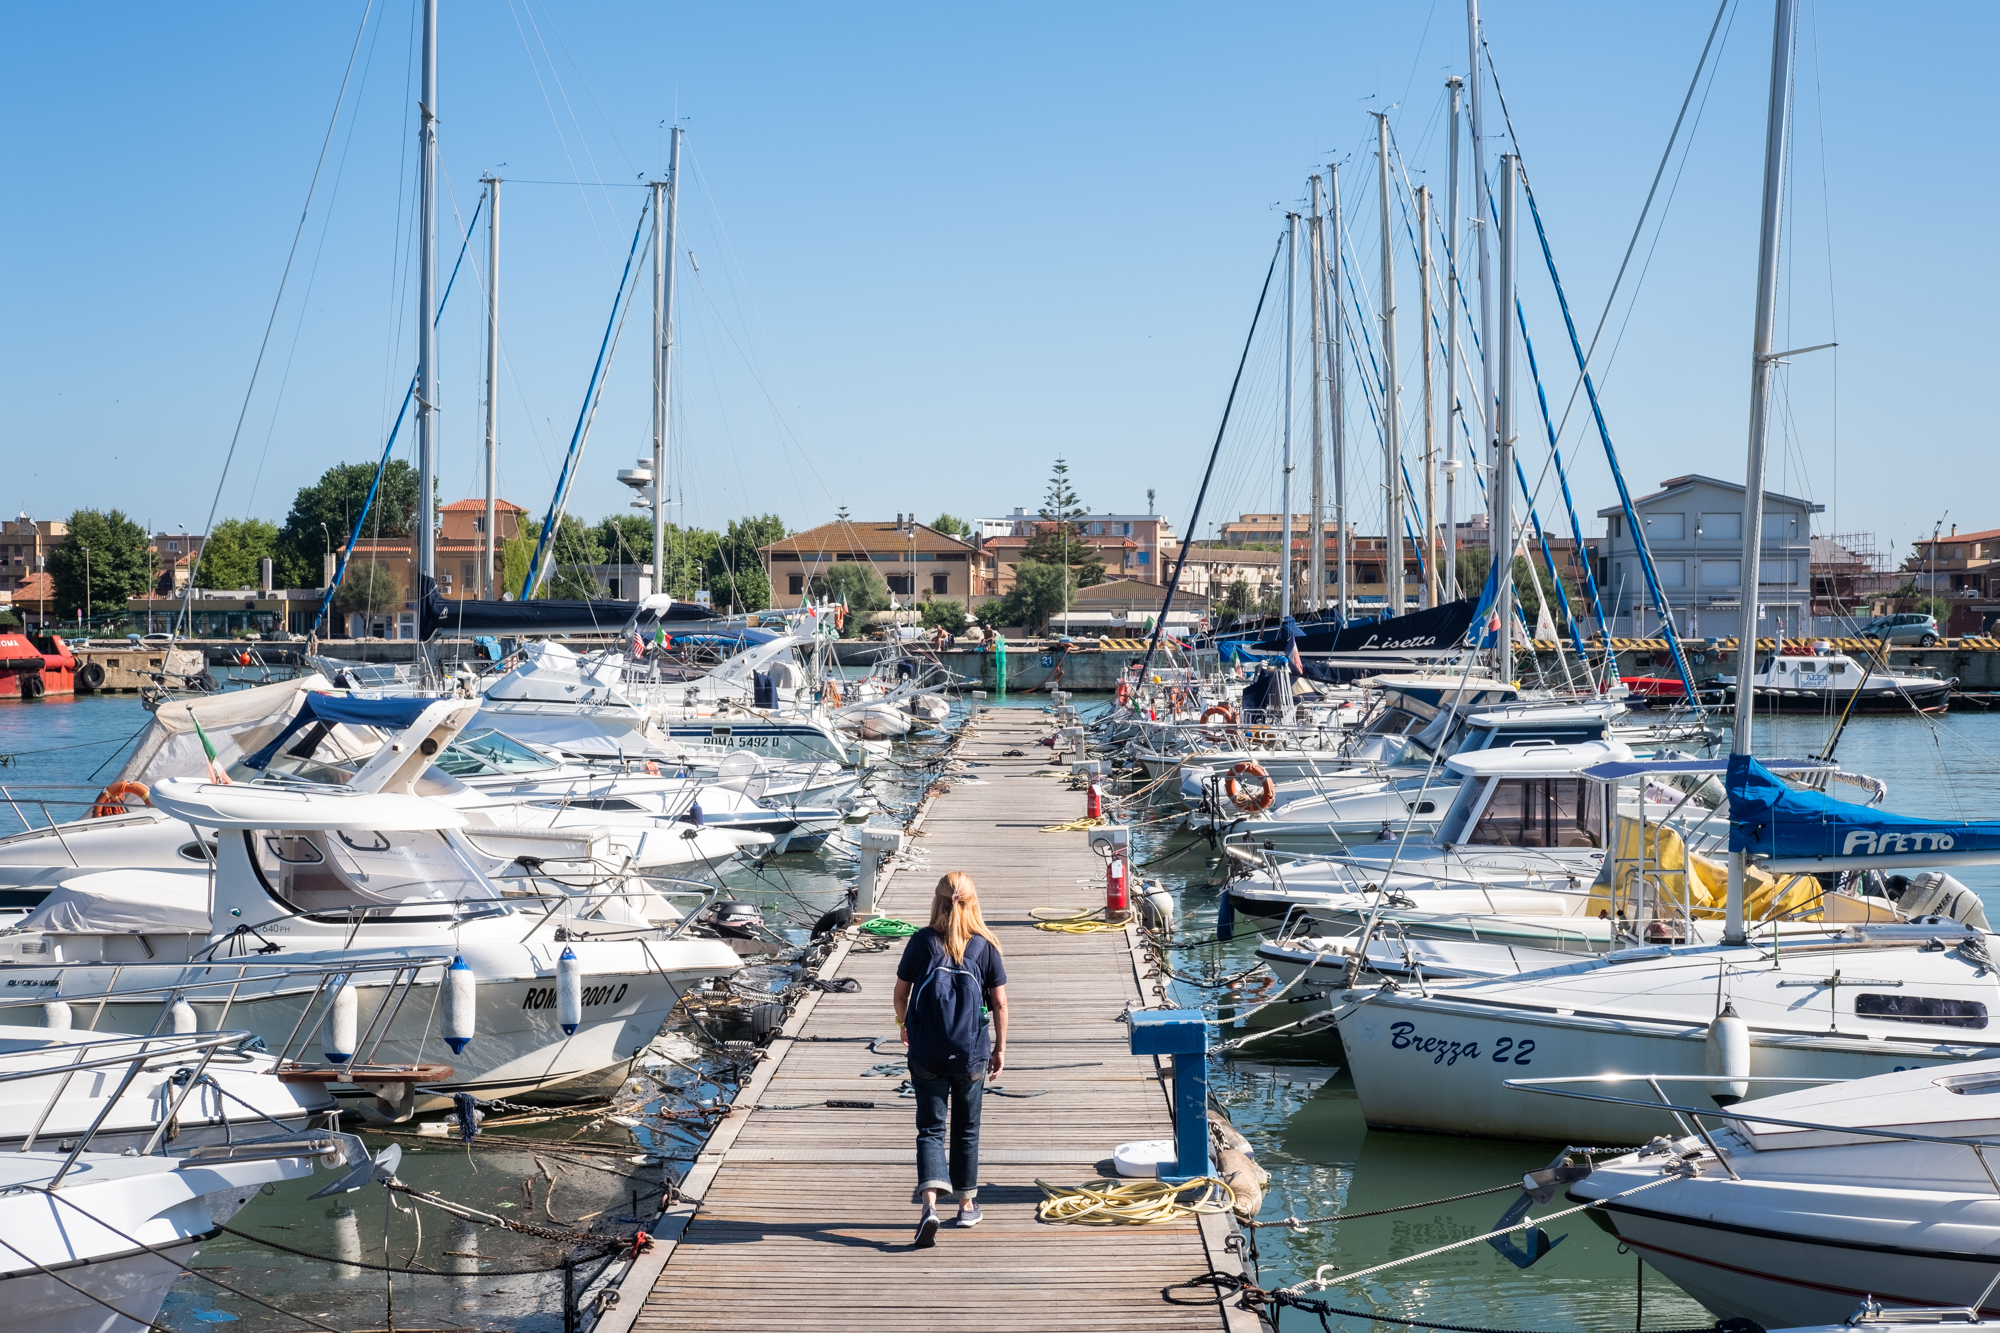  Patrizia Pilloni walks along a Fiumicino Harbor pier in Italy to meet her instructor for a daily sailing lesson. 